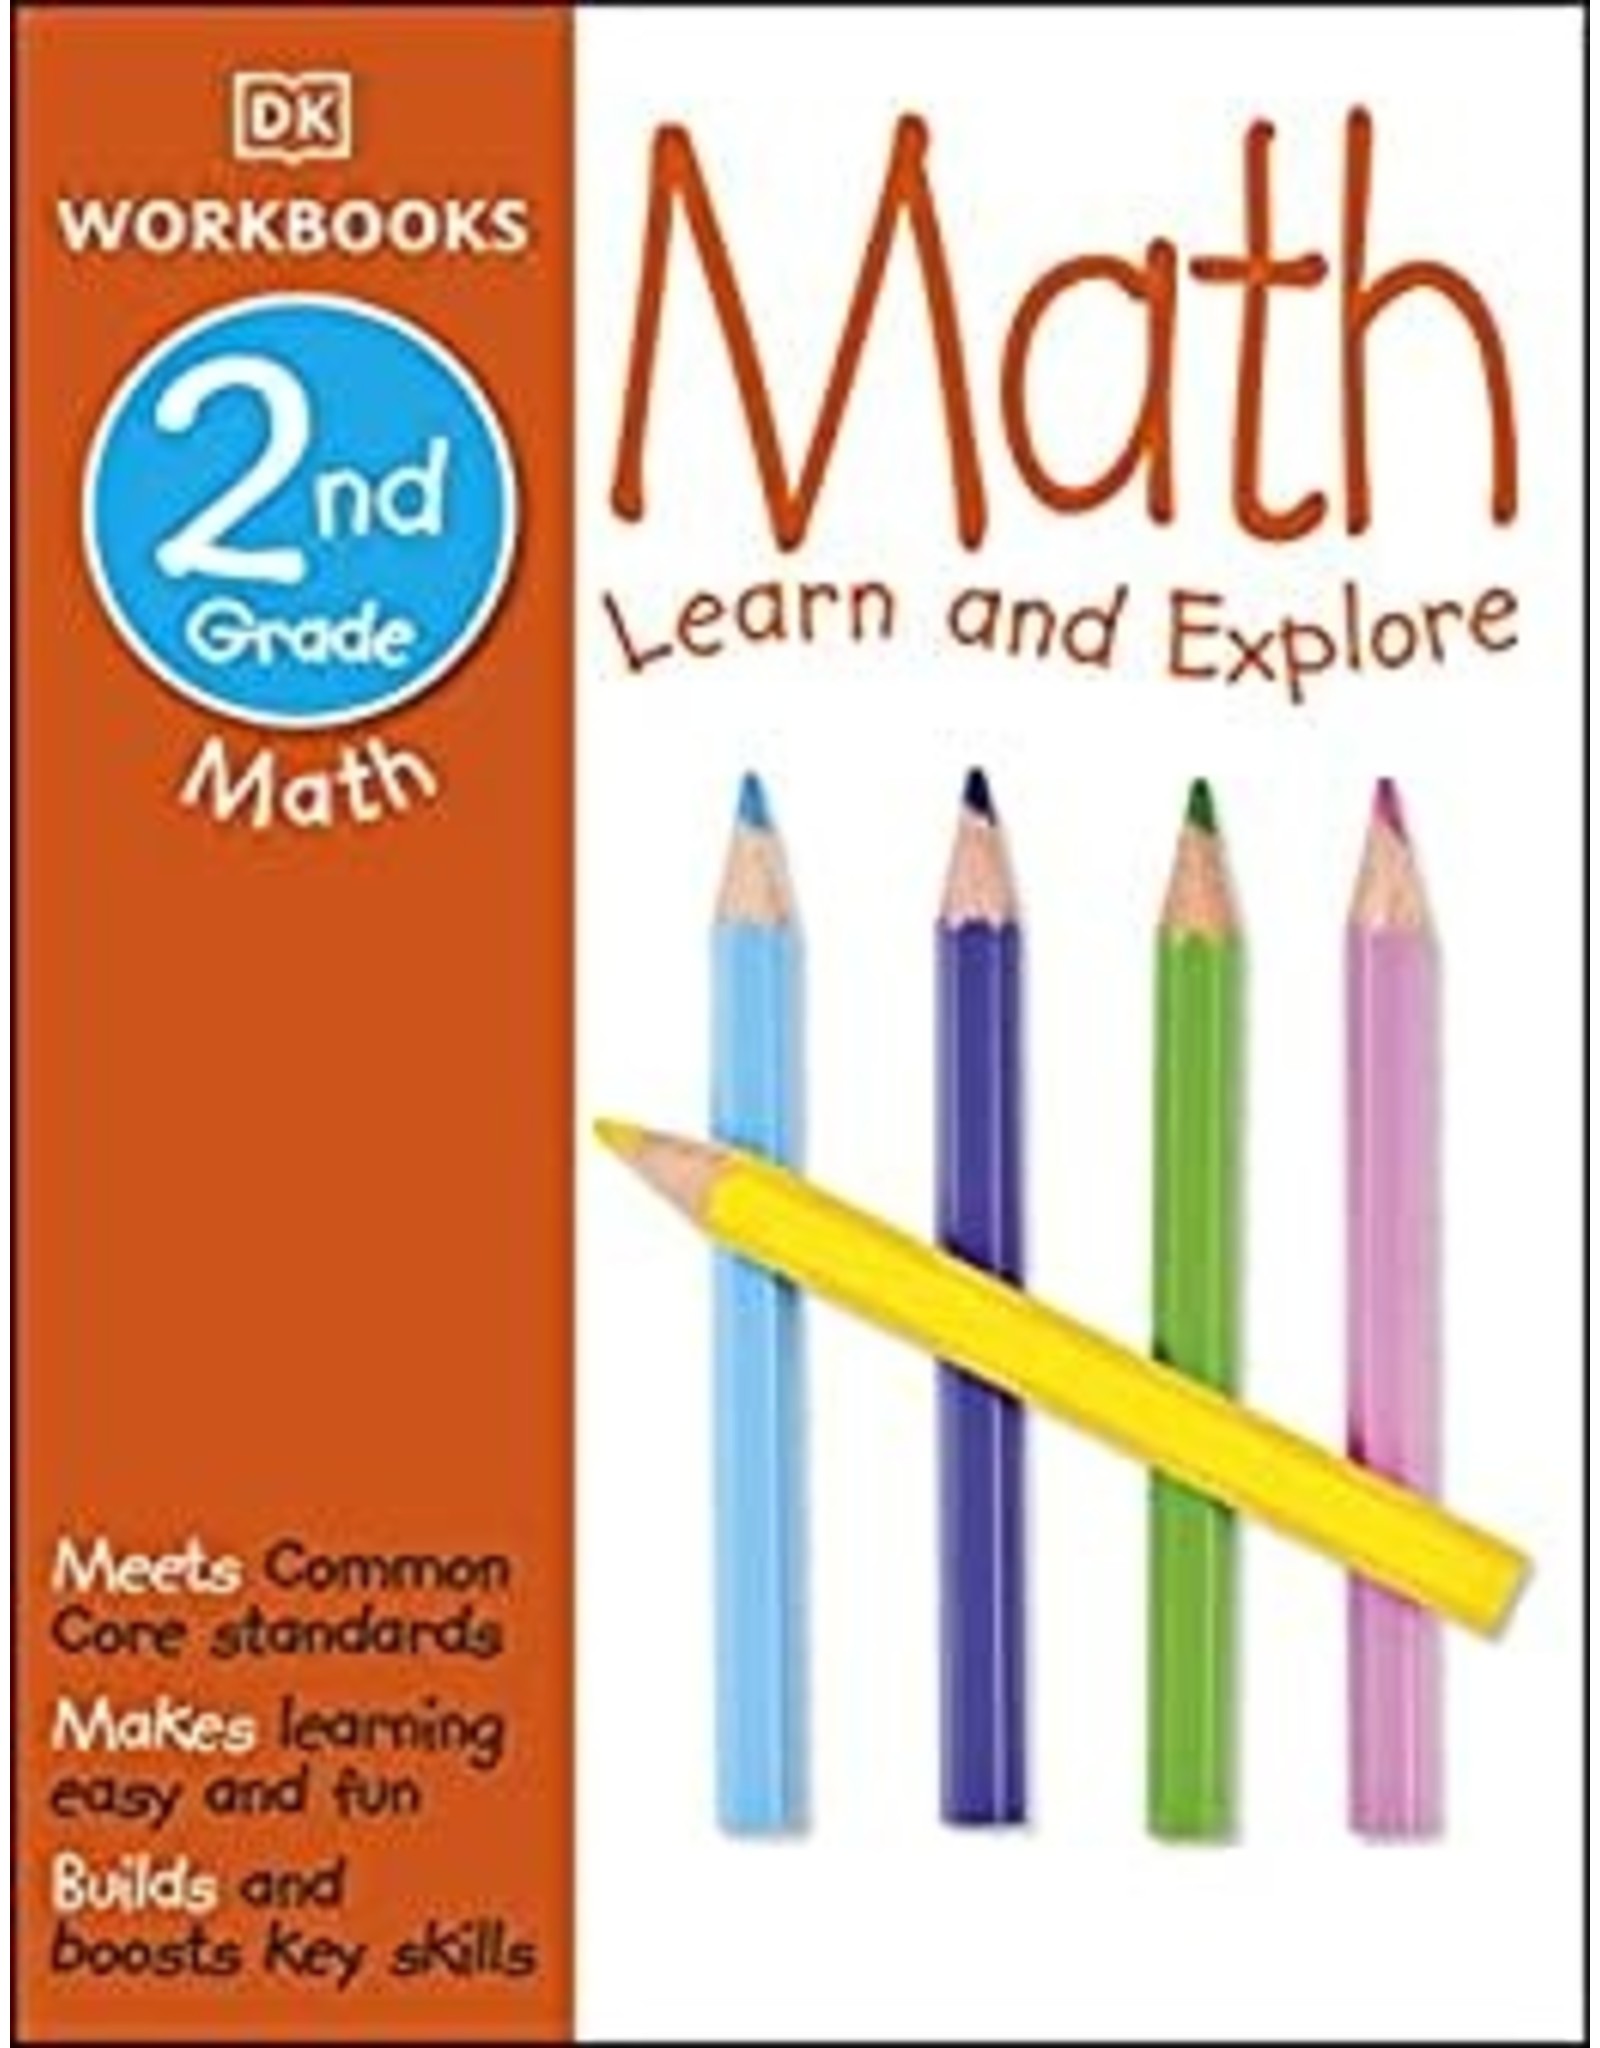 2nd Grade Math Learn and Explore